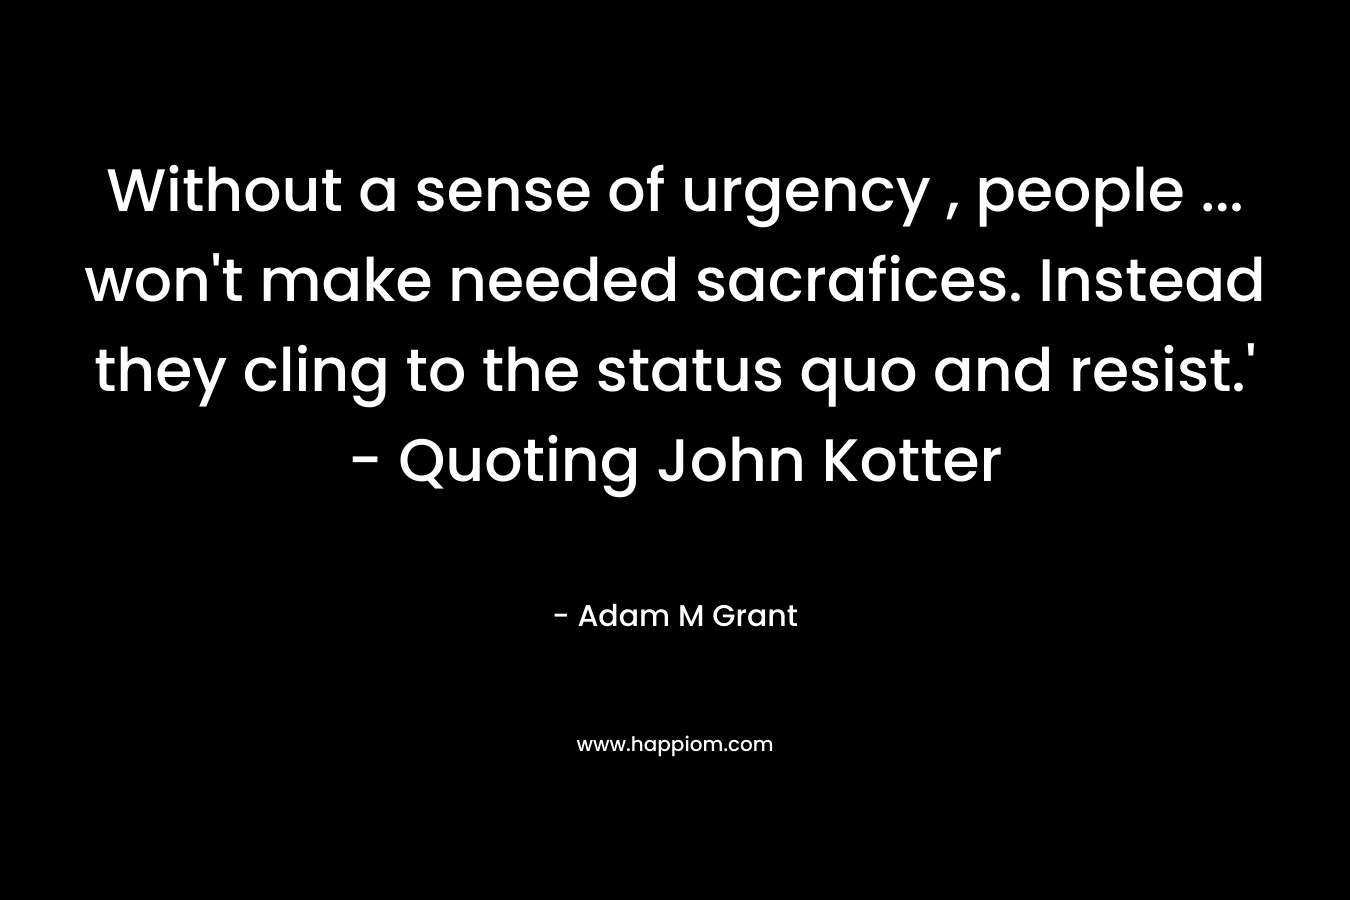 Without a sense of urgency , people ... won't make needed sacrafices. Instead they cling to the status quo and resist.' - Quoting John Kotter